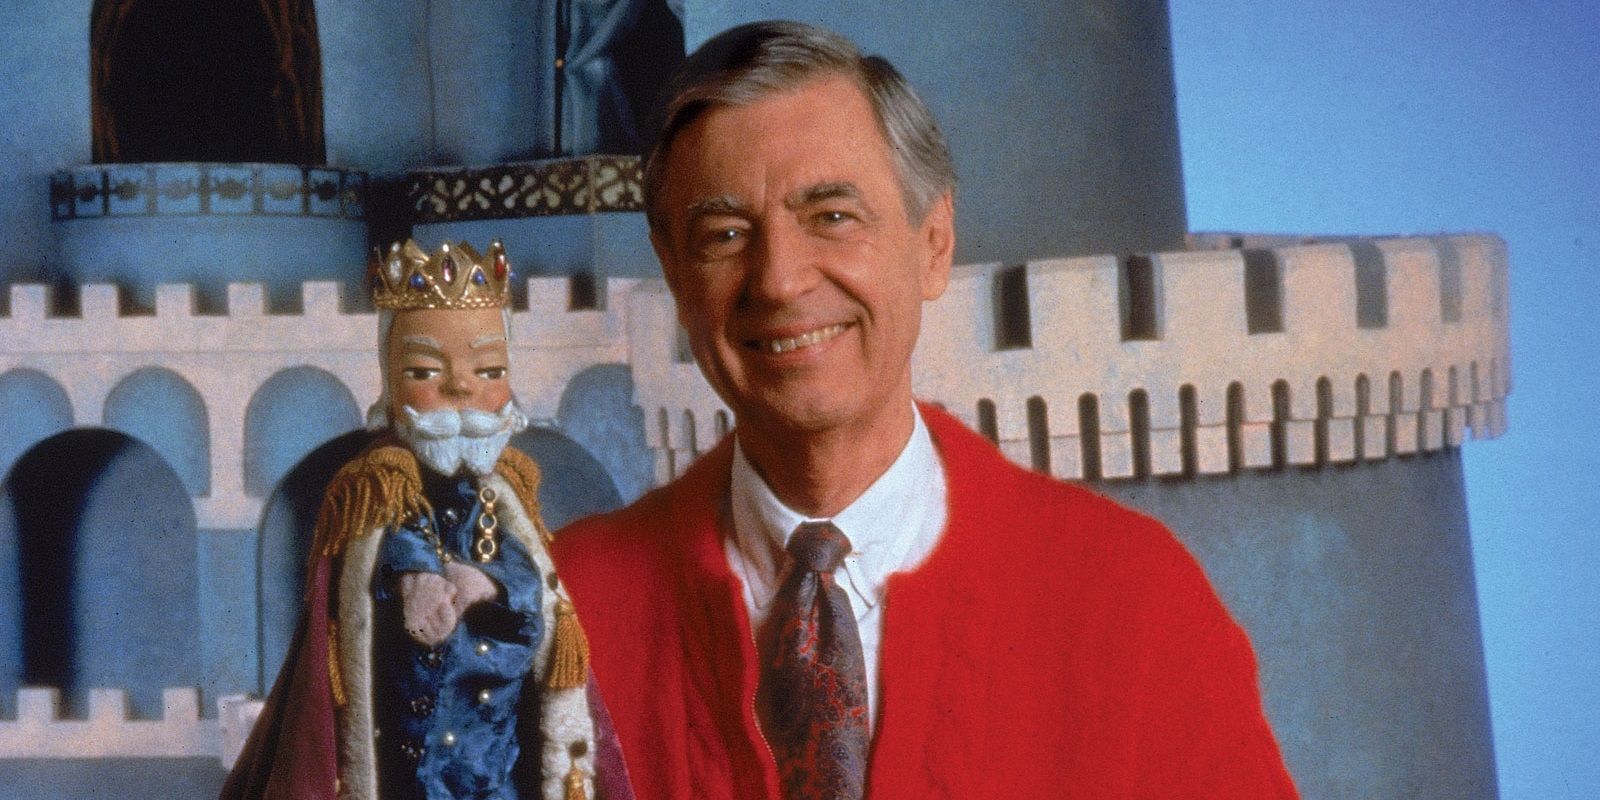 Mister Rogers Nuclear - Most Controversial Episodes